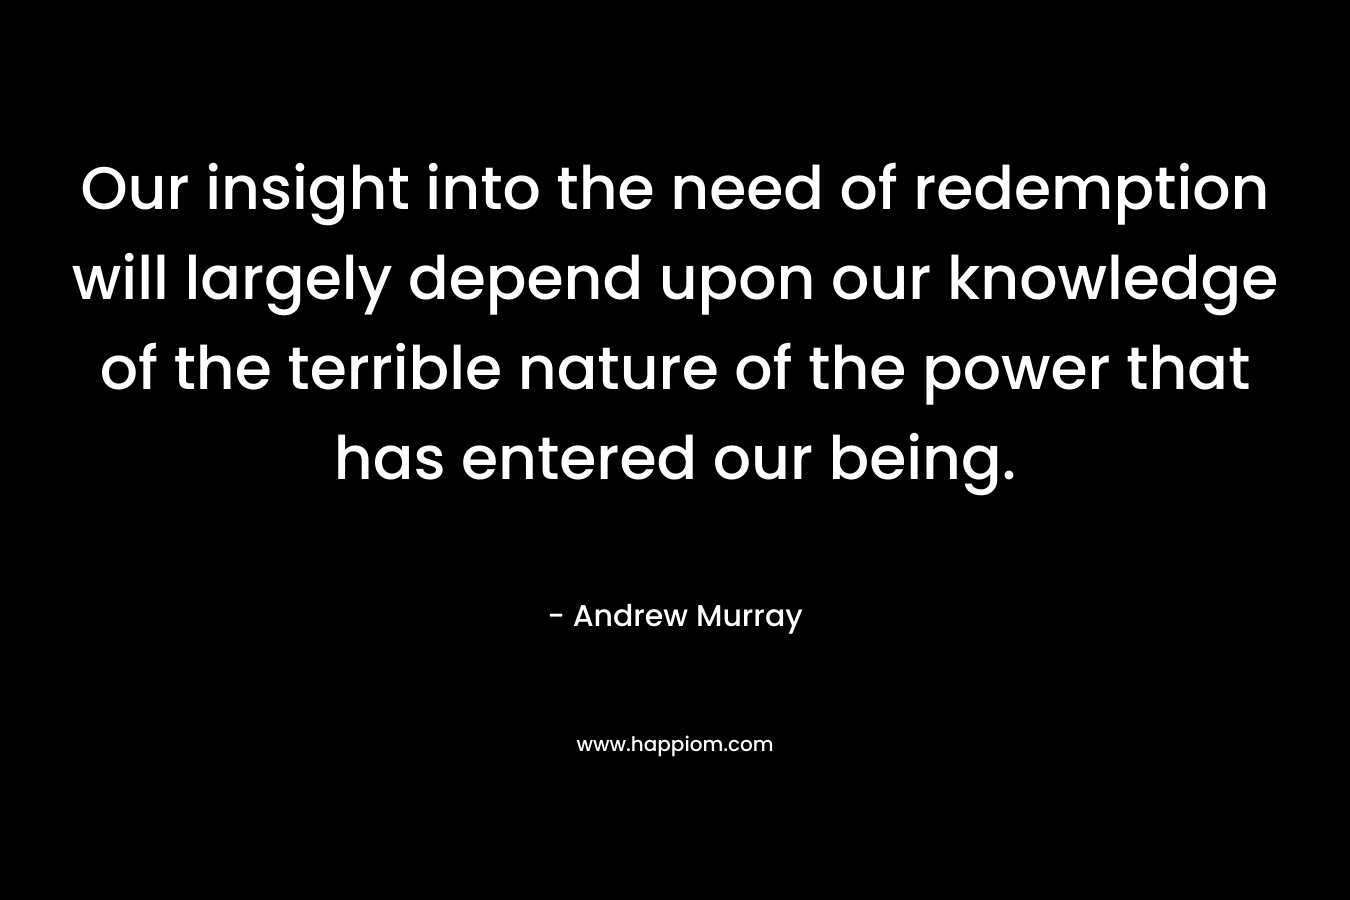 Our insight into the need of redemption will largely depend upon our knowledge of the terrible nature of the power that has entered our being. – Andrew Murray